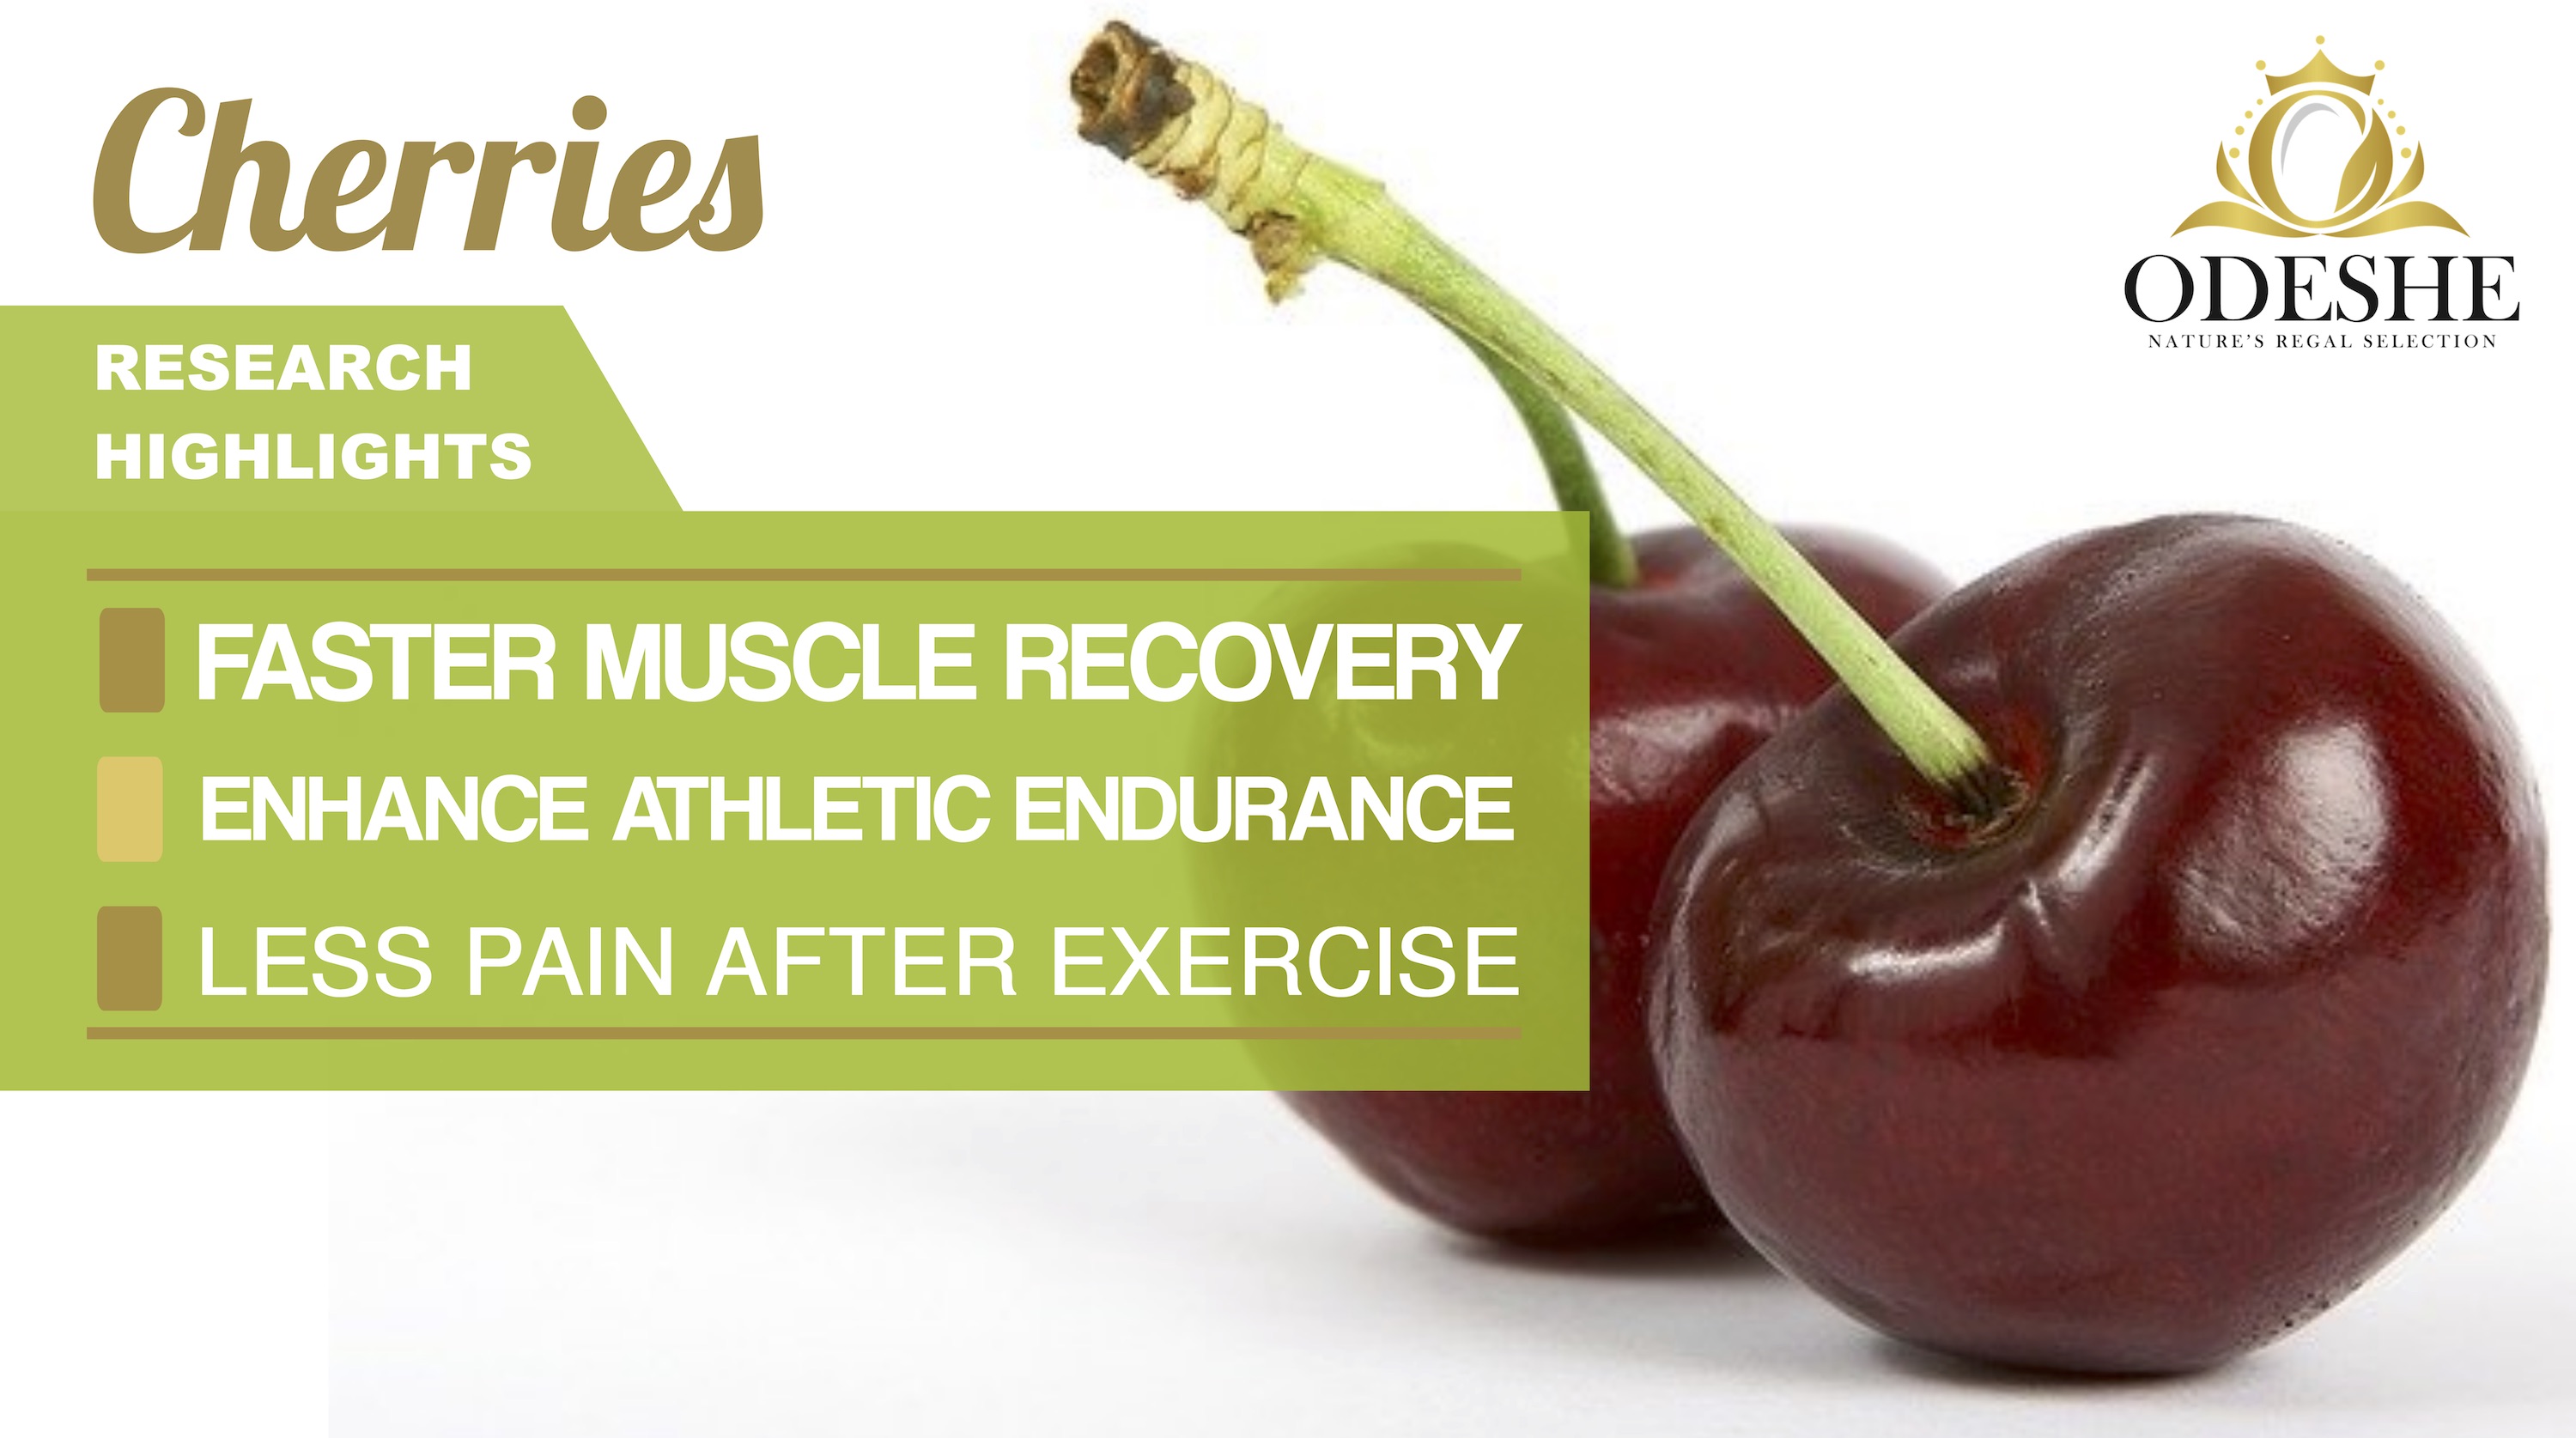 Cherries Increase Athletic Endurance and Muscle Recovery after Exercise       